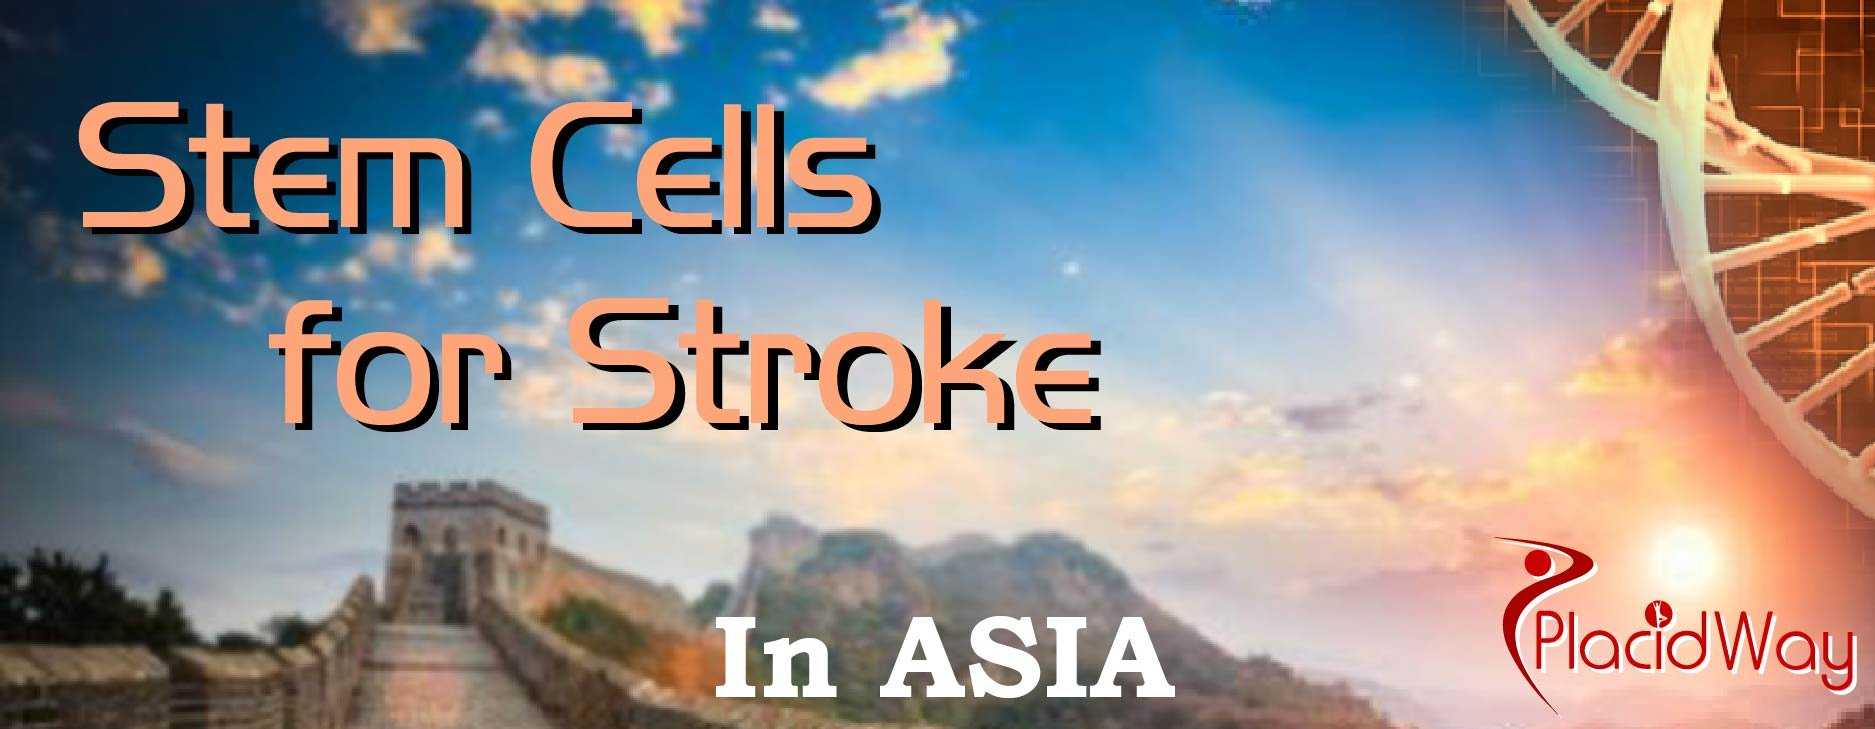 Stroke in Asia, Stem Cell for Stroke Middle East, Austral-Asia